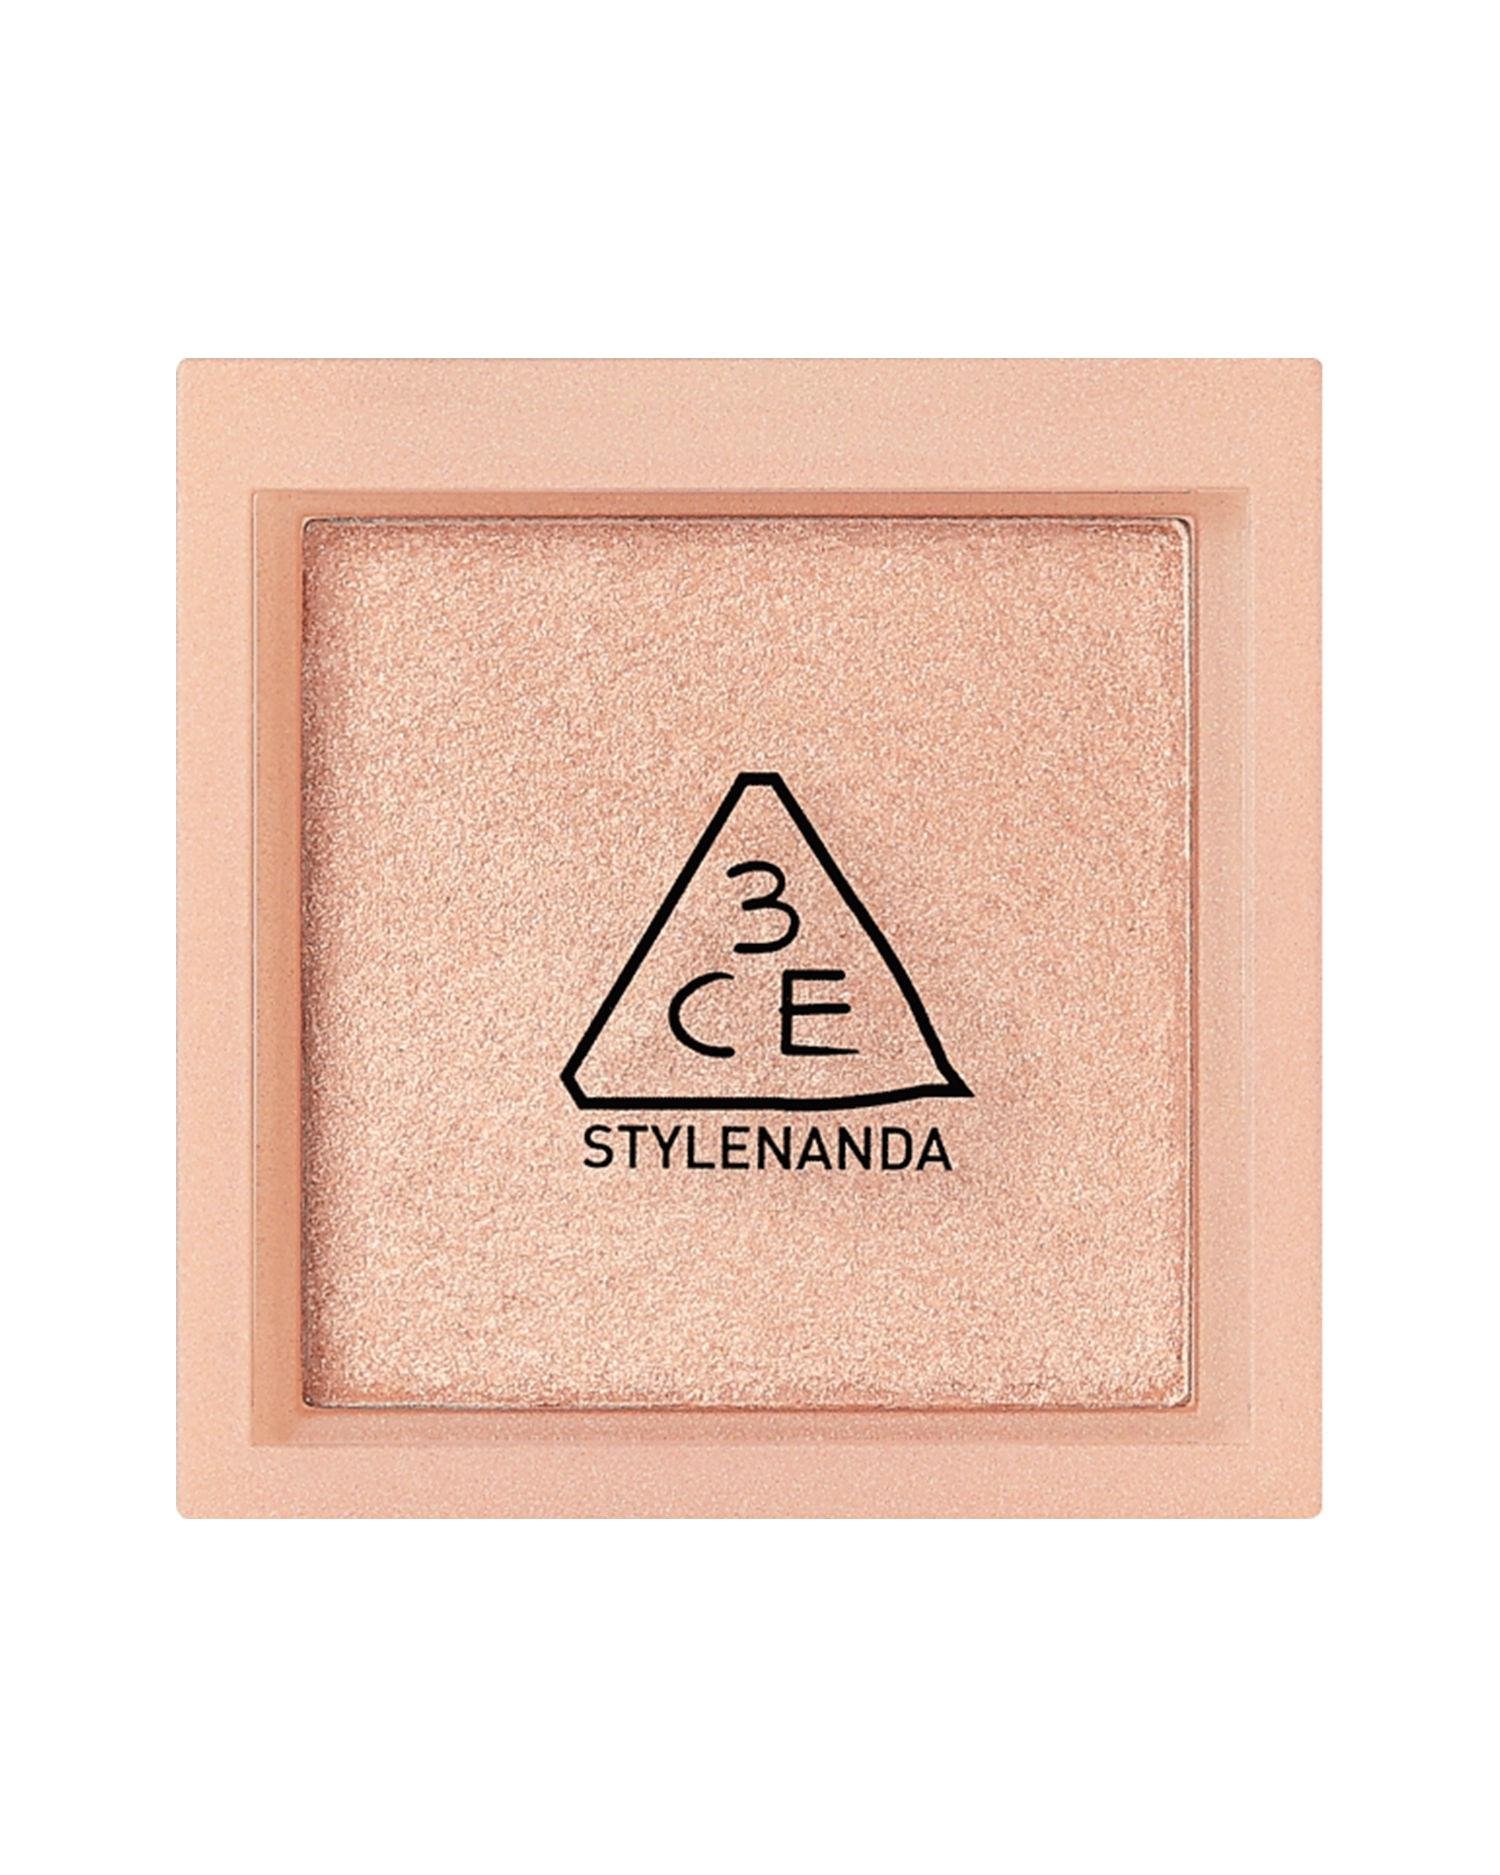 Face highlighter #Open Side by 3CE